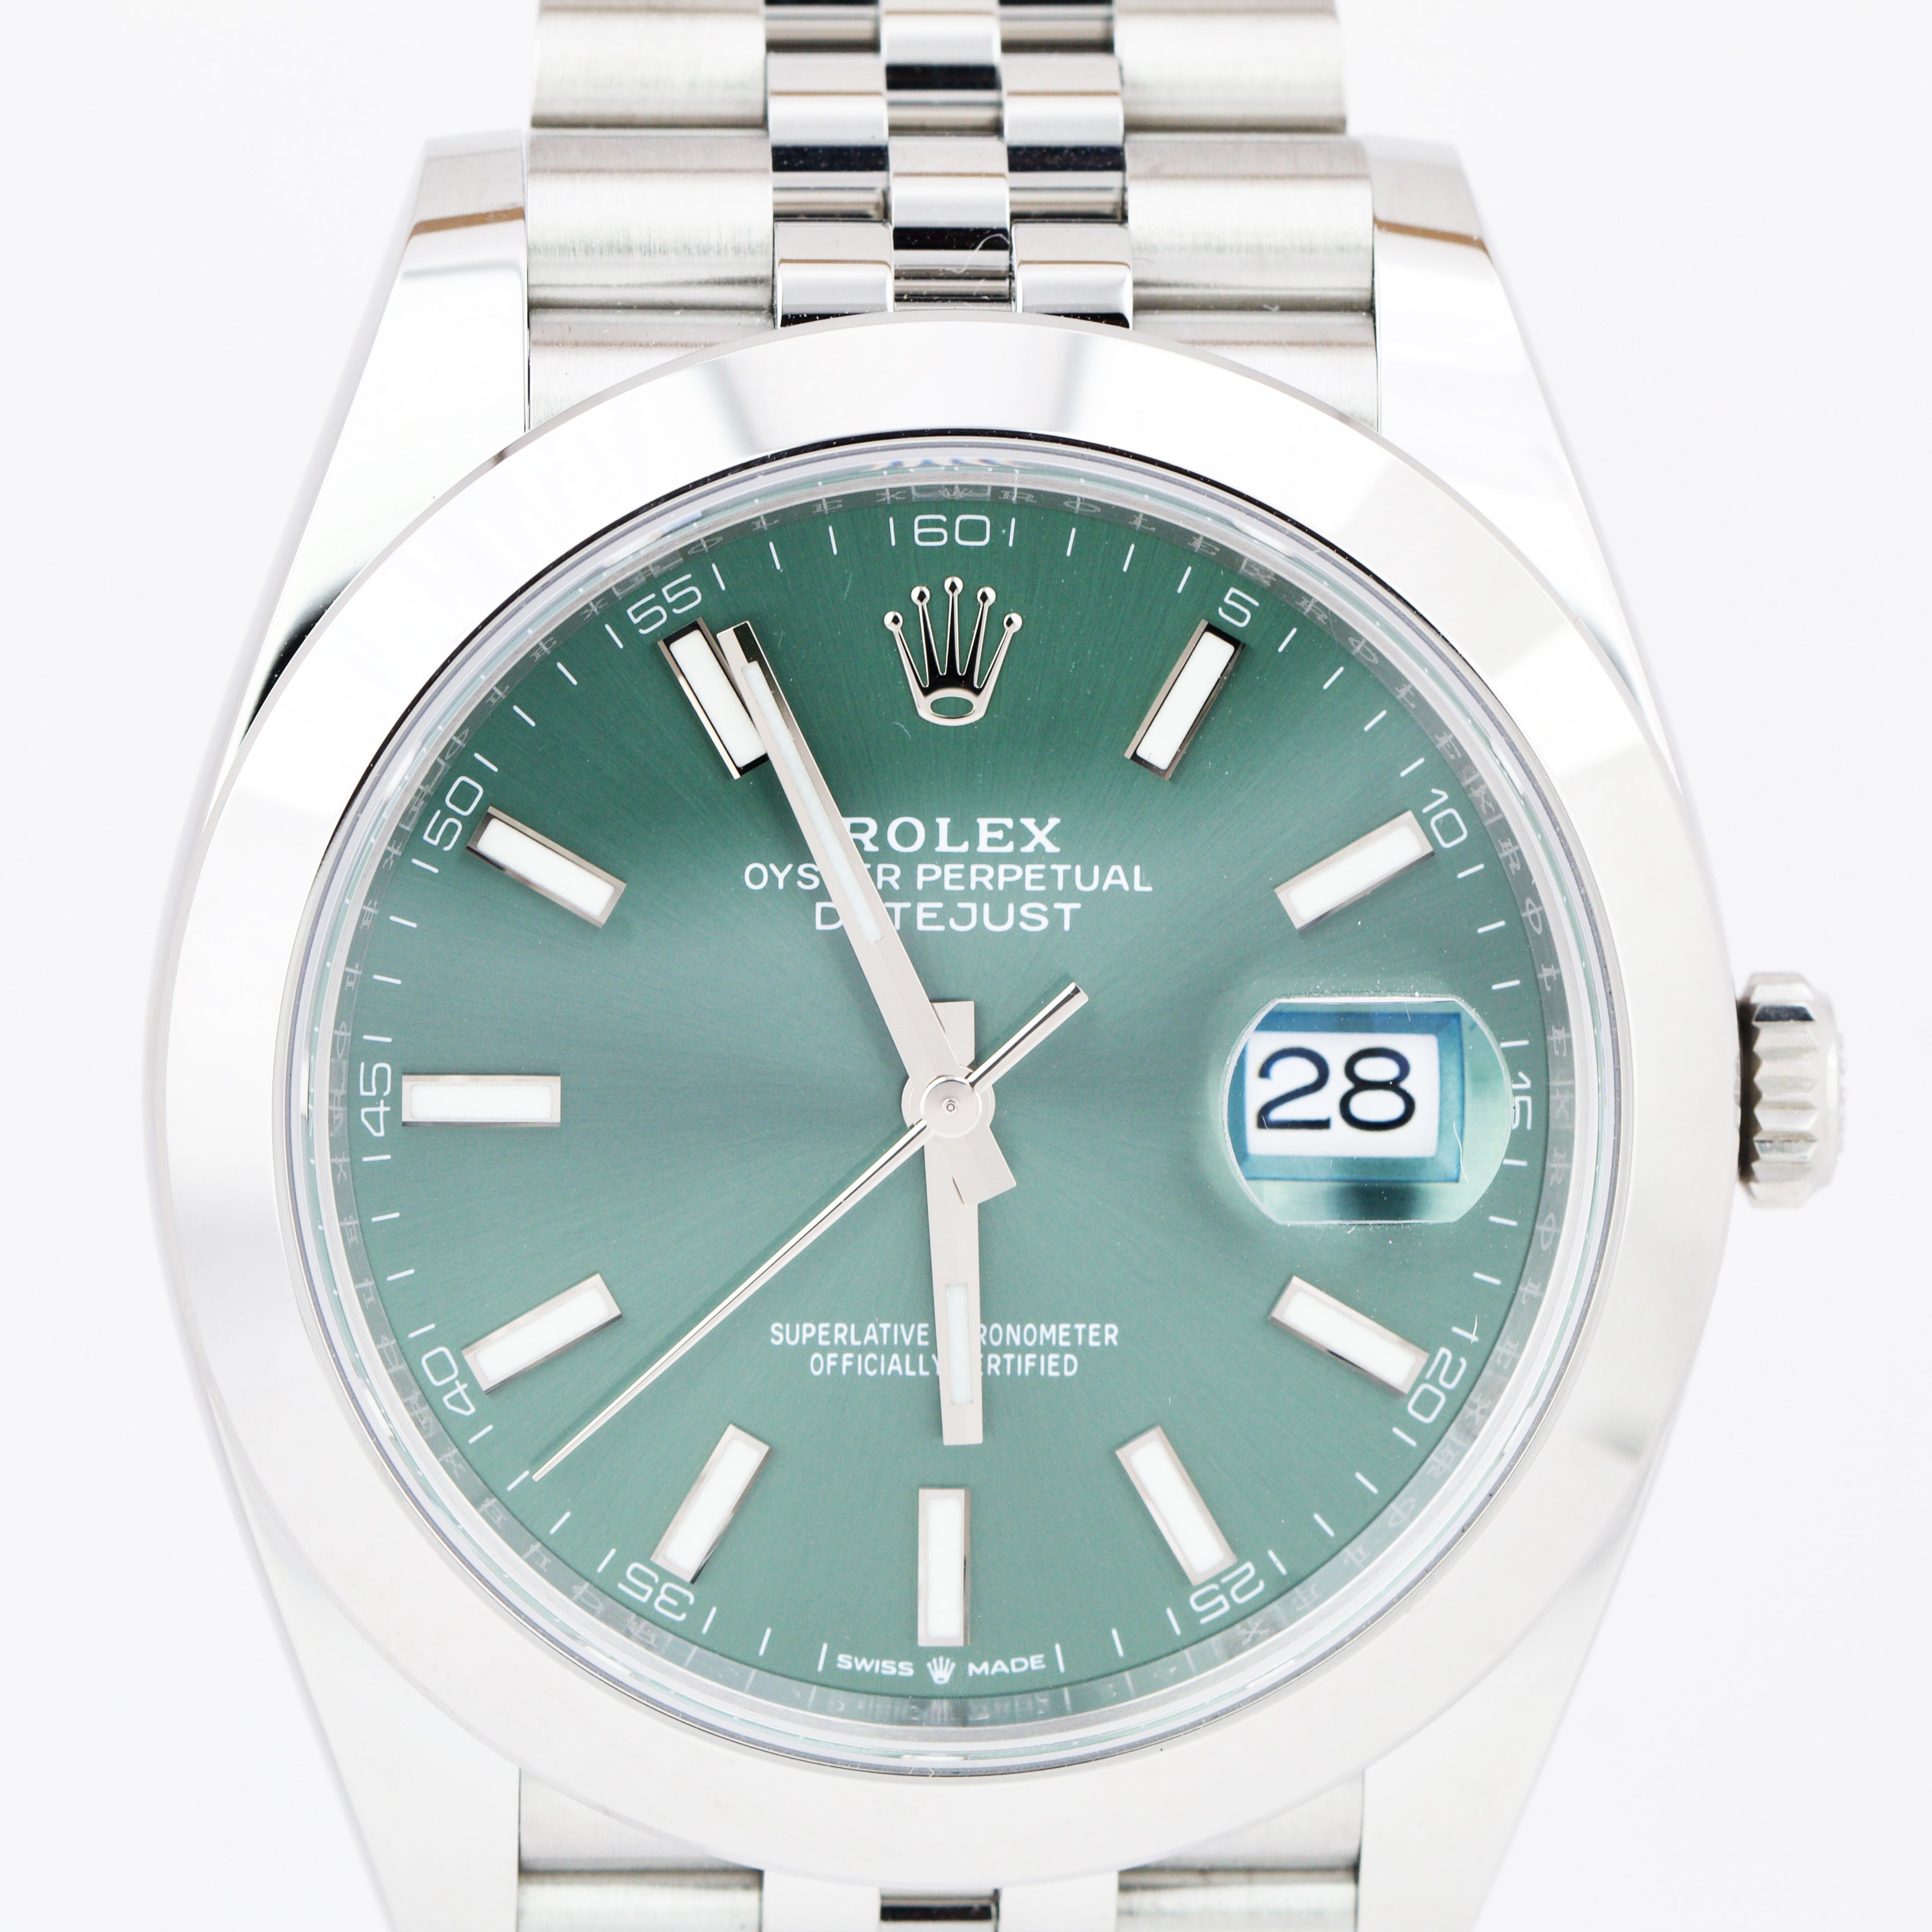 MARCH 2023 NEW Rolex DateJust 41 GREEN 41mm JUBILEE Stainless 126300 Watch B&P